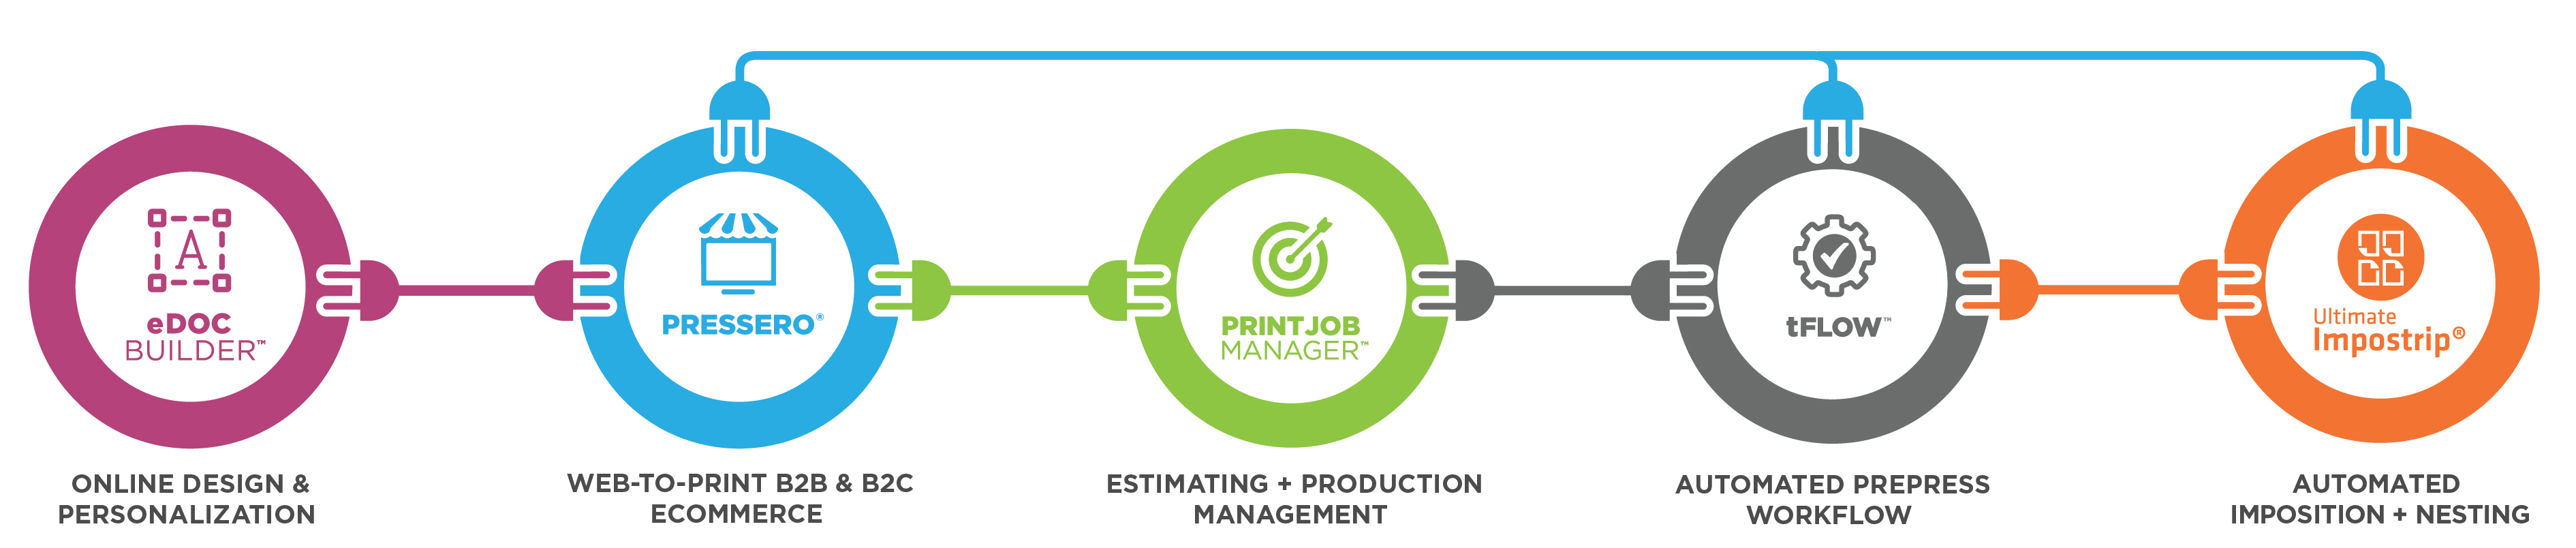  Intelligent Print Workflow Delivers Increased Efficiency Profitability at SGIA